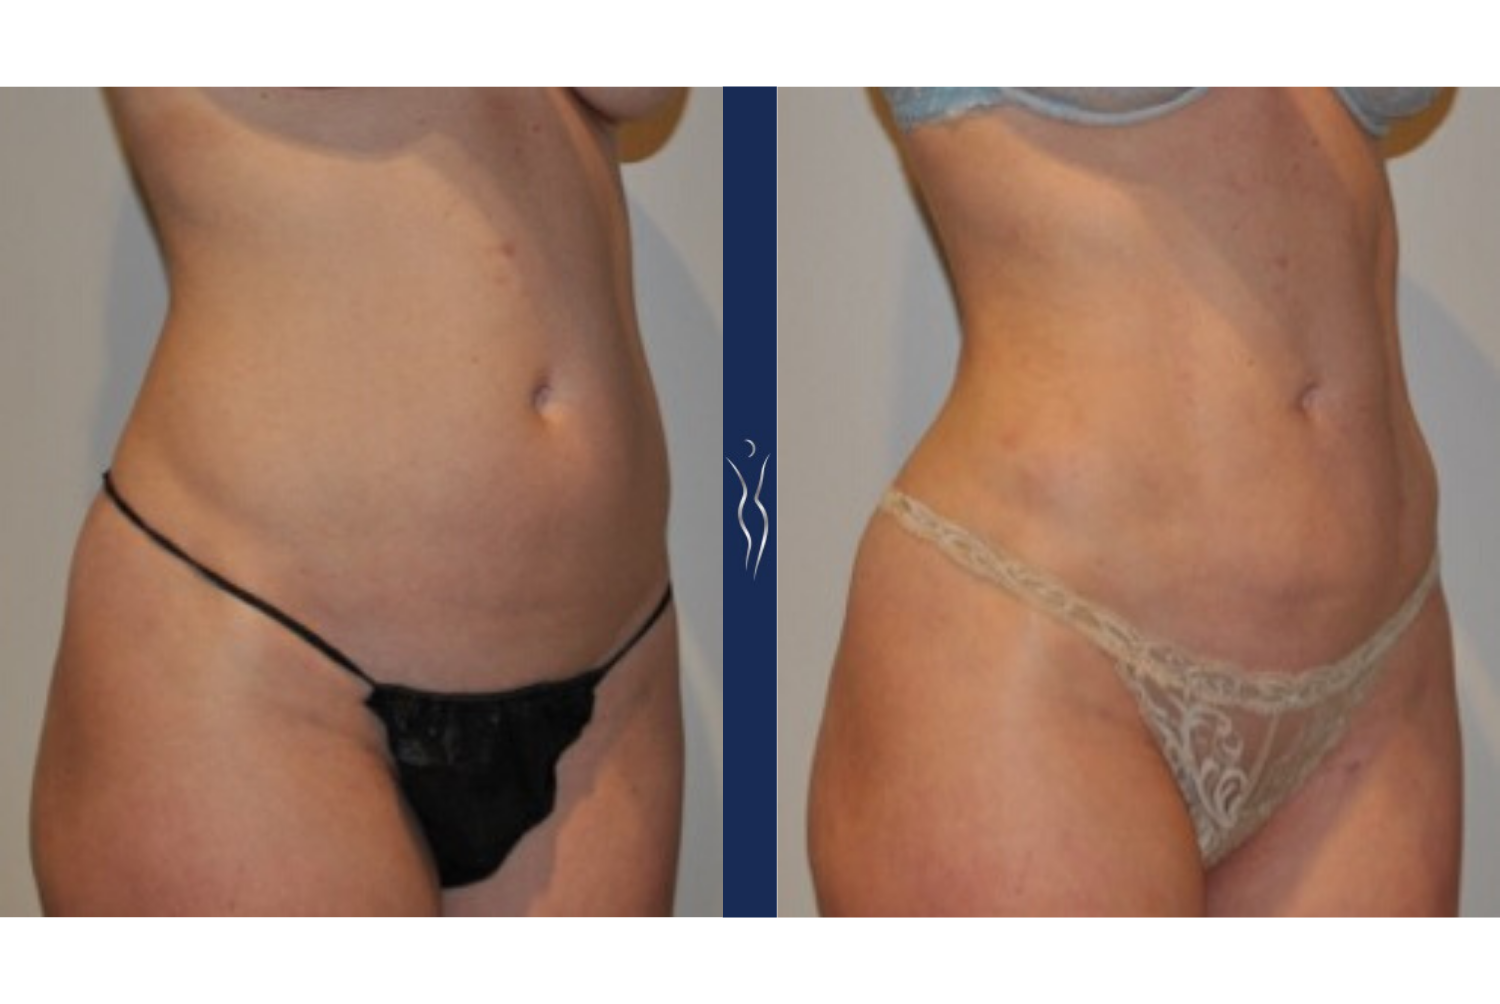 36 year old caucasian lady VASER liposuction and Renuvion right oblique